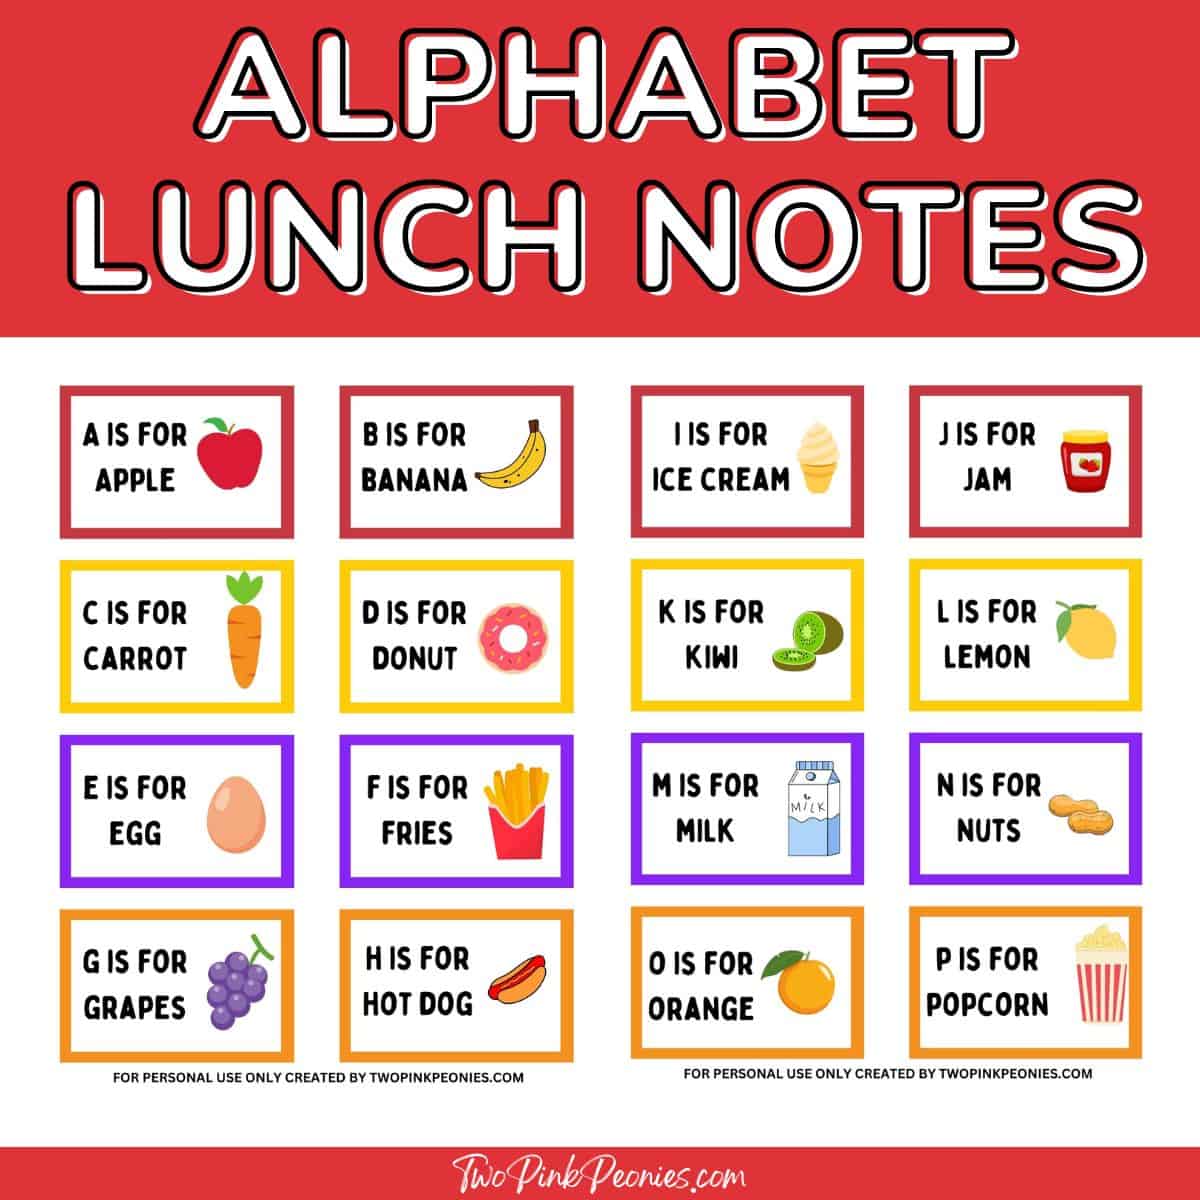 Text that says alphabet lunch notes with mock ups for letters A through P notes.